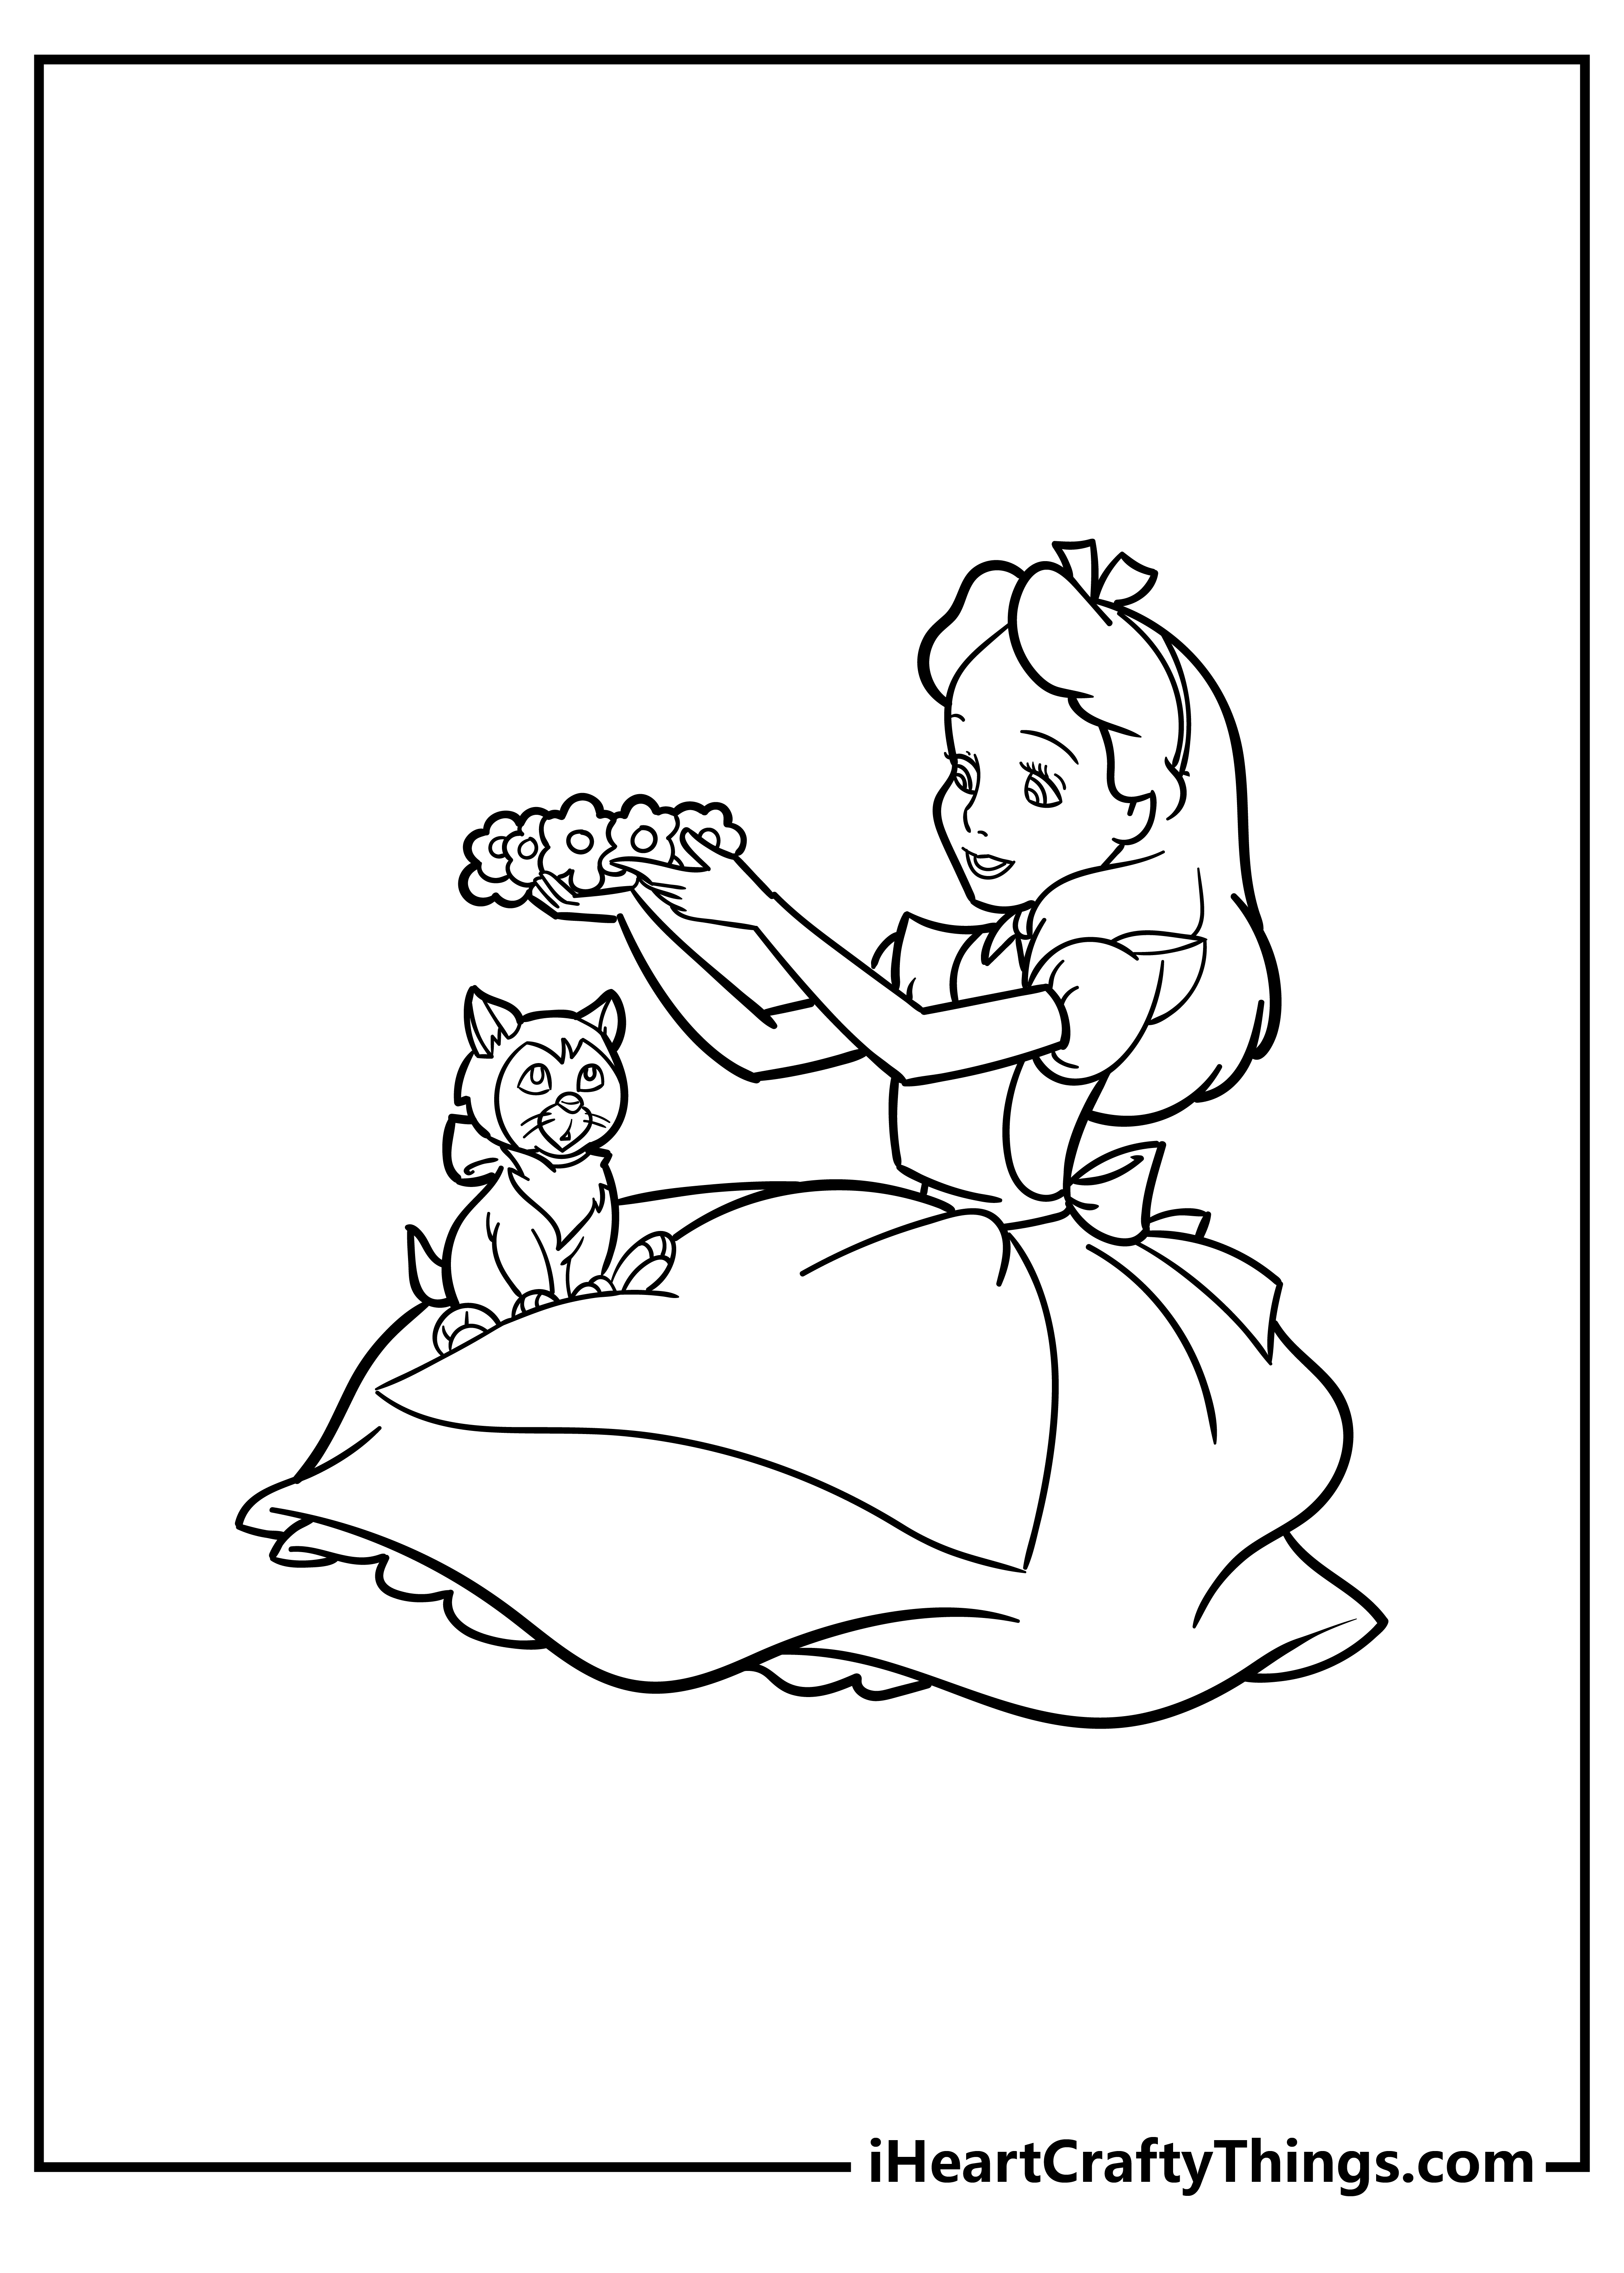 Alice In Wonderland Coloring Pages free pdf download